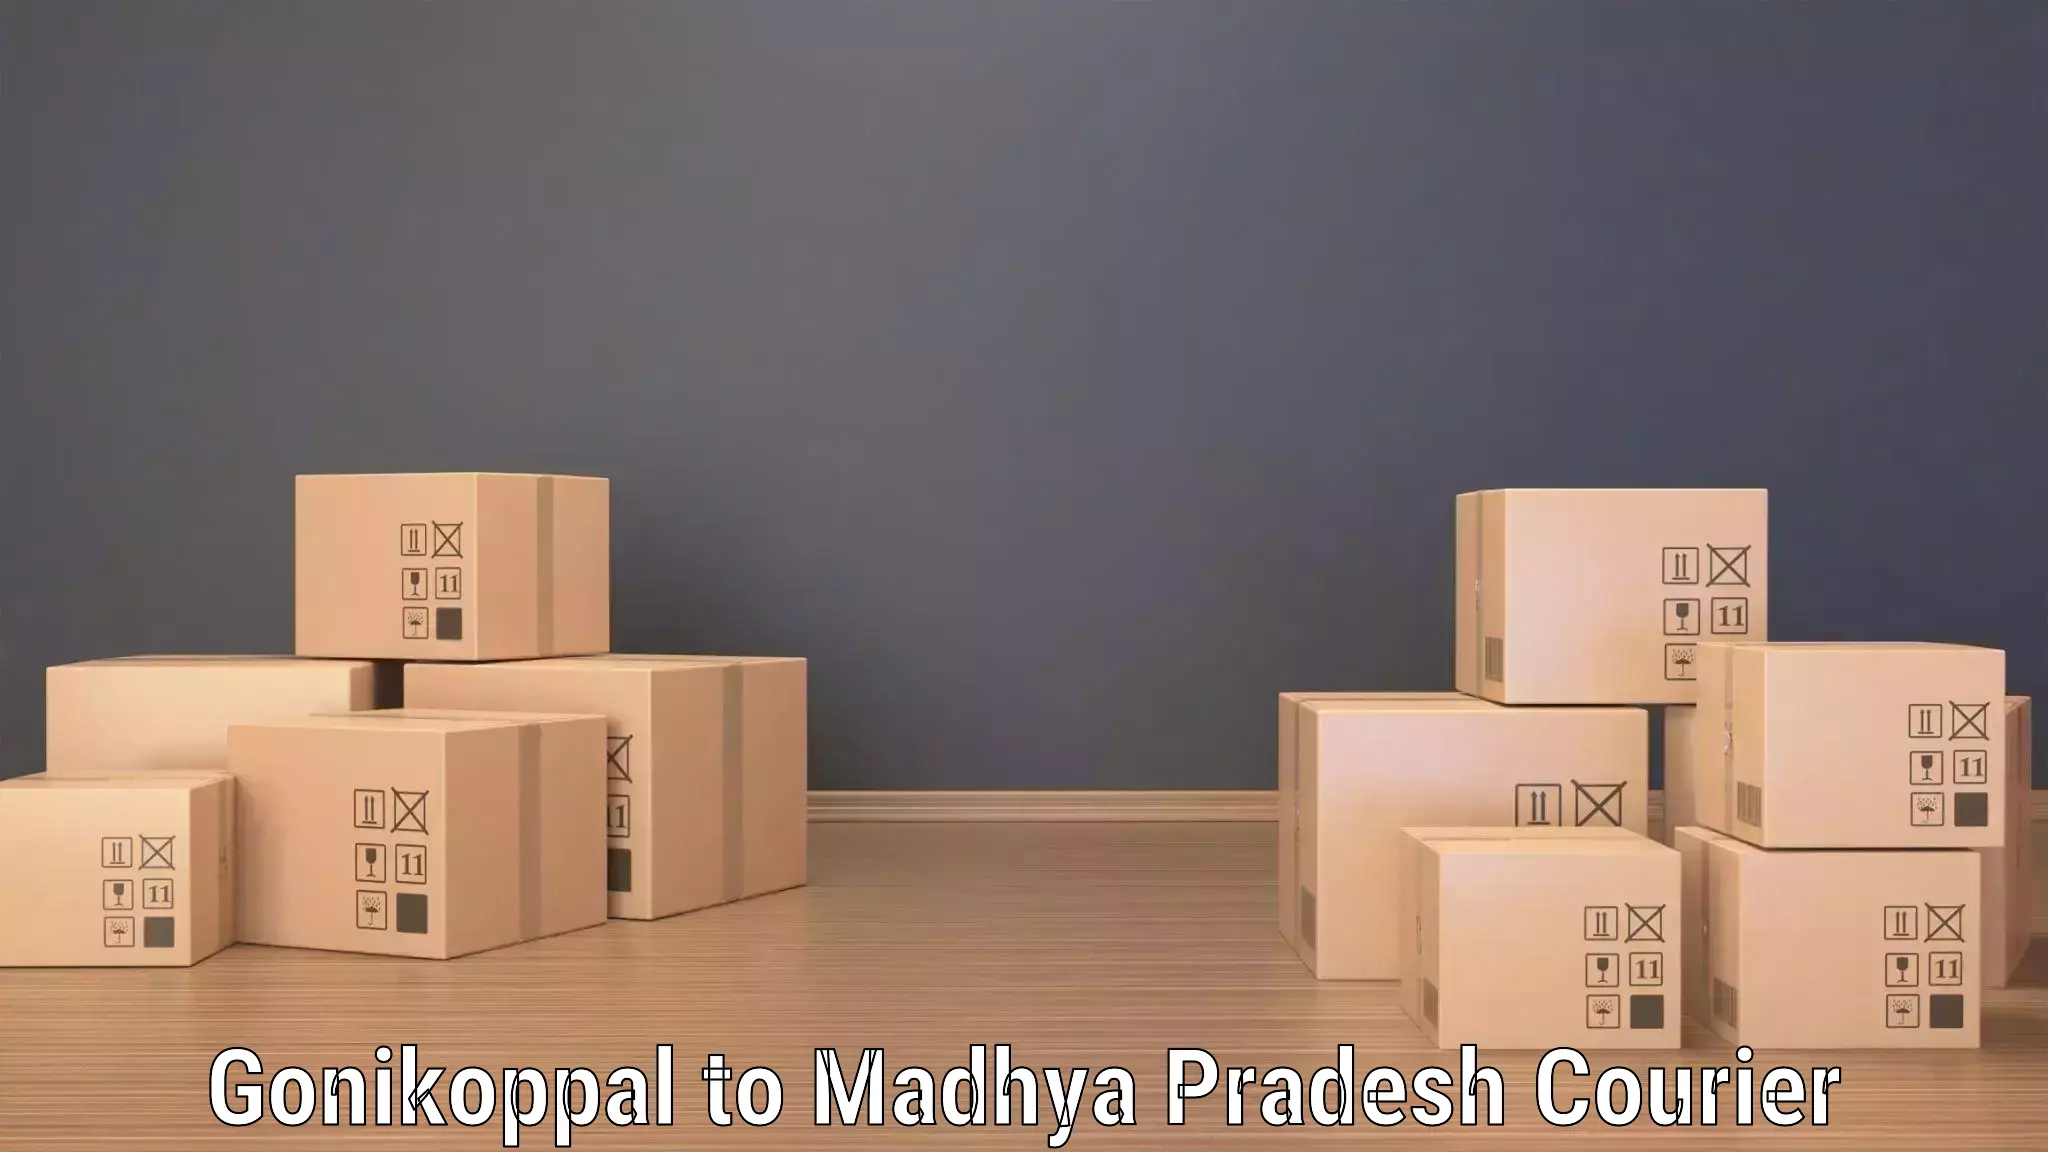 Full-service courier options Gonikoppal to IIIT Bhopal